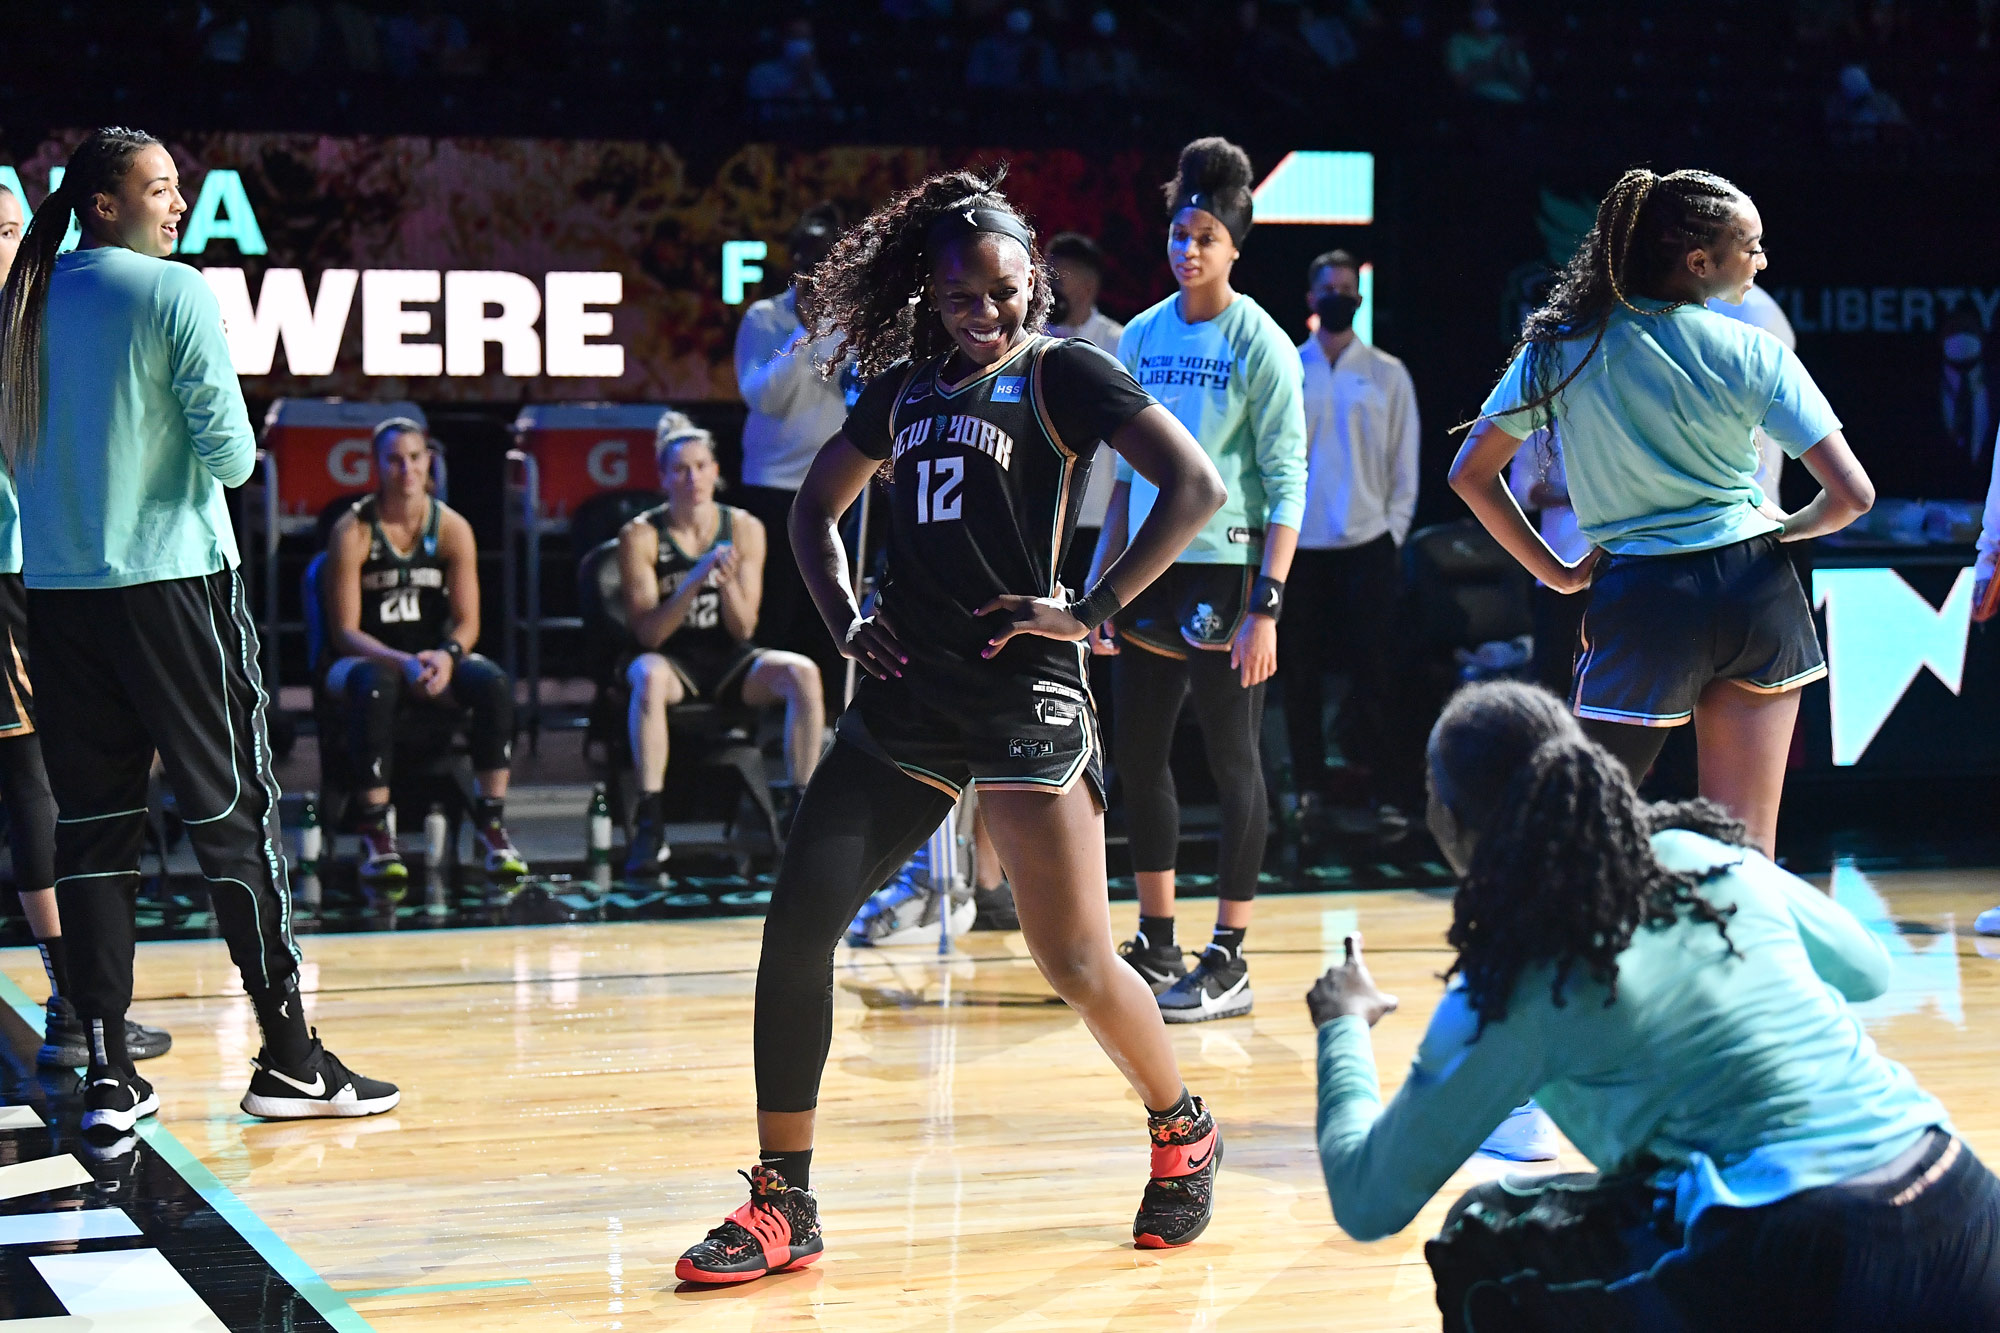 As she heads into her second season of women’s pro basketball in the US, Onyenwere aims to use her platform to speak out about race in particular.